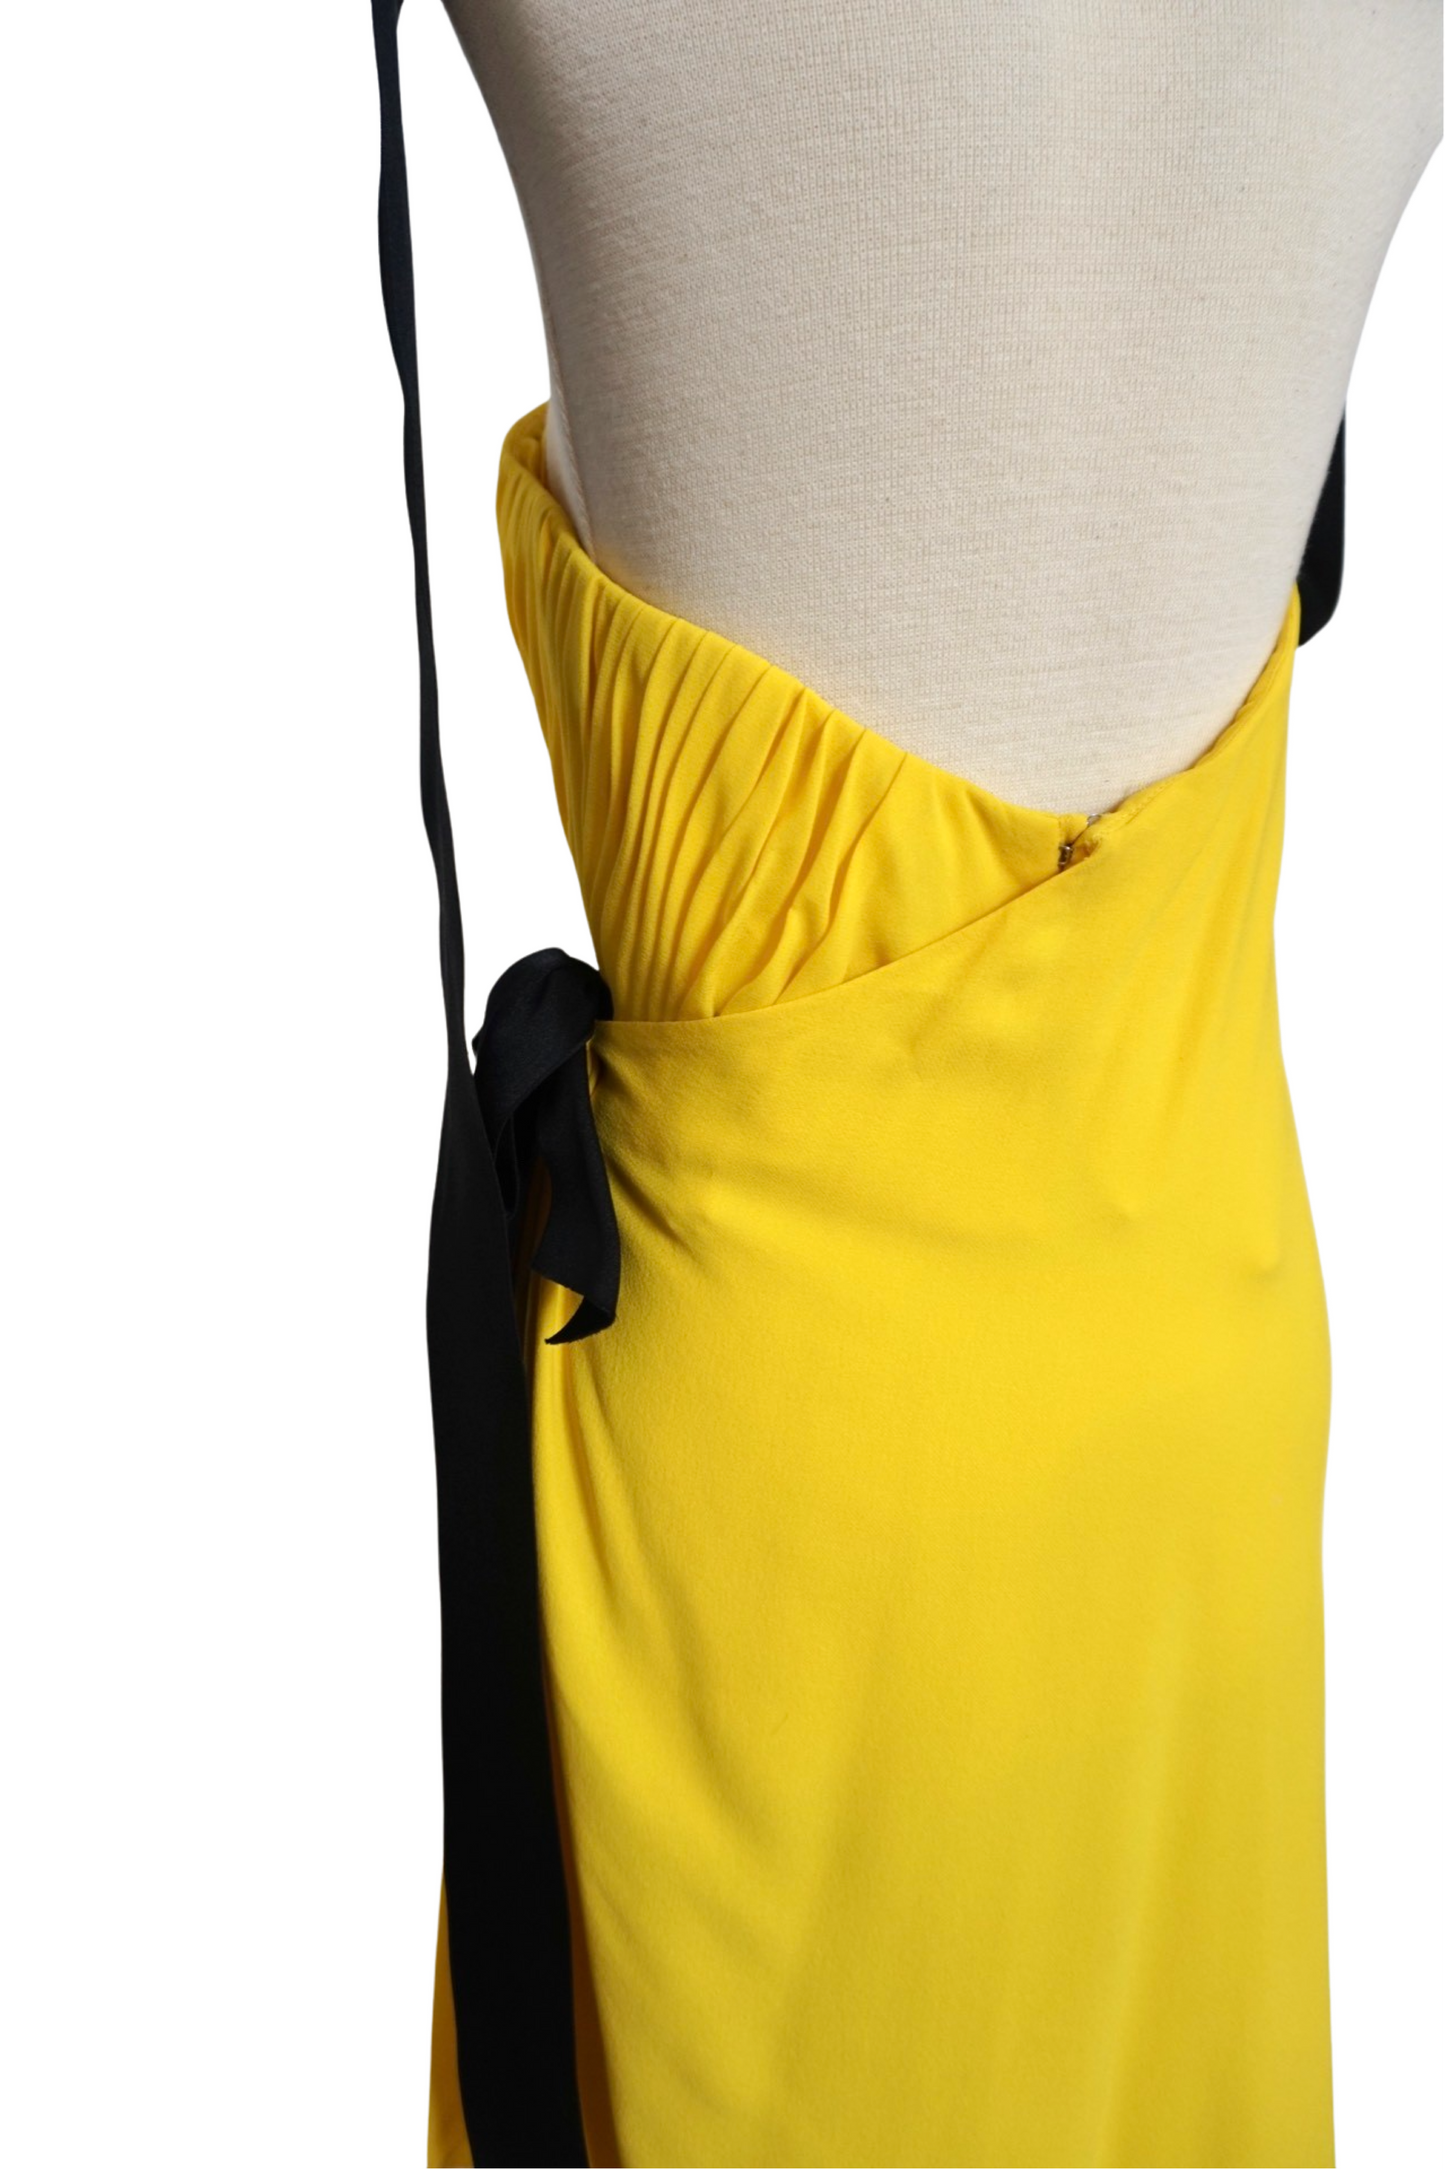 Chanel Spring 1991 Yellow Cocktail Dress with Black Bow